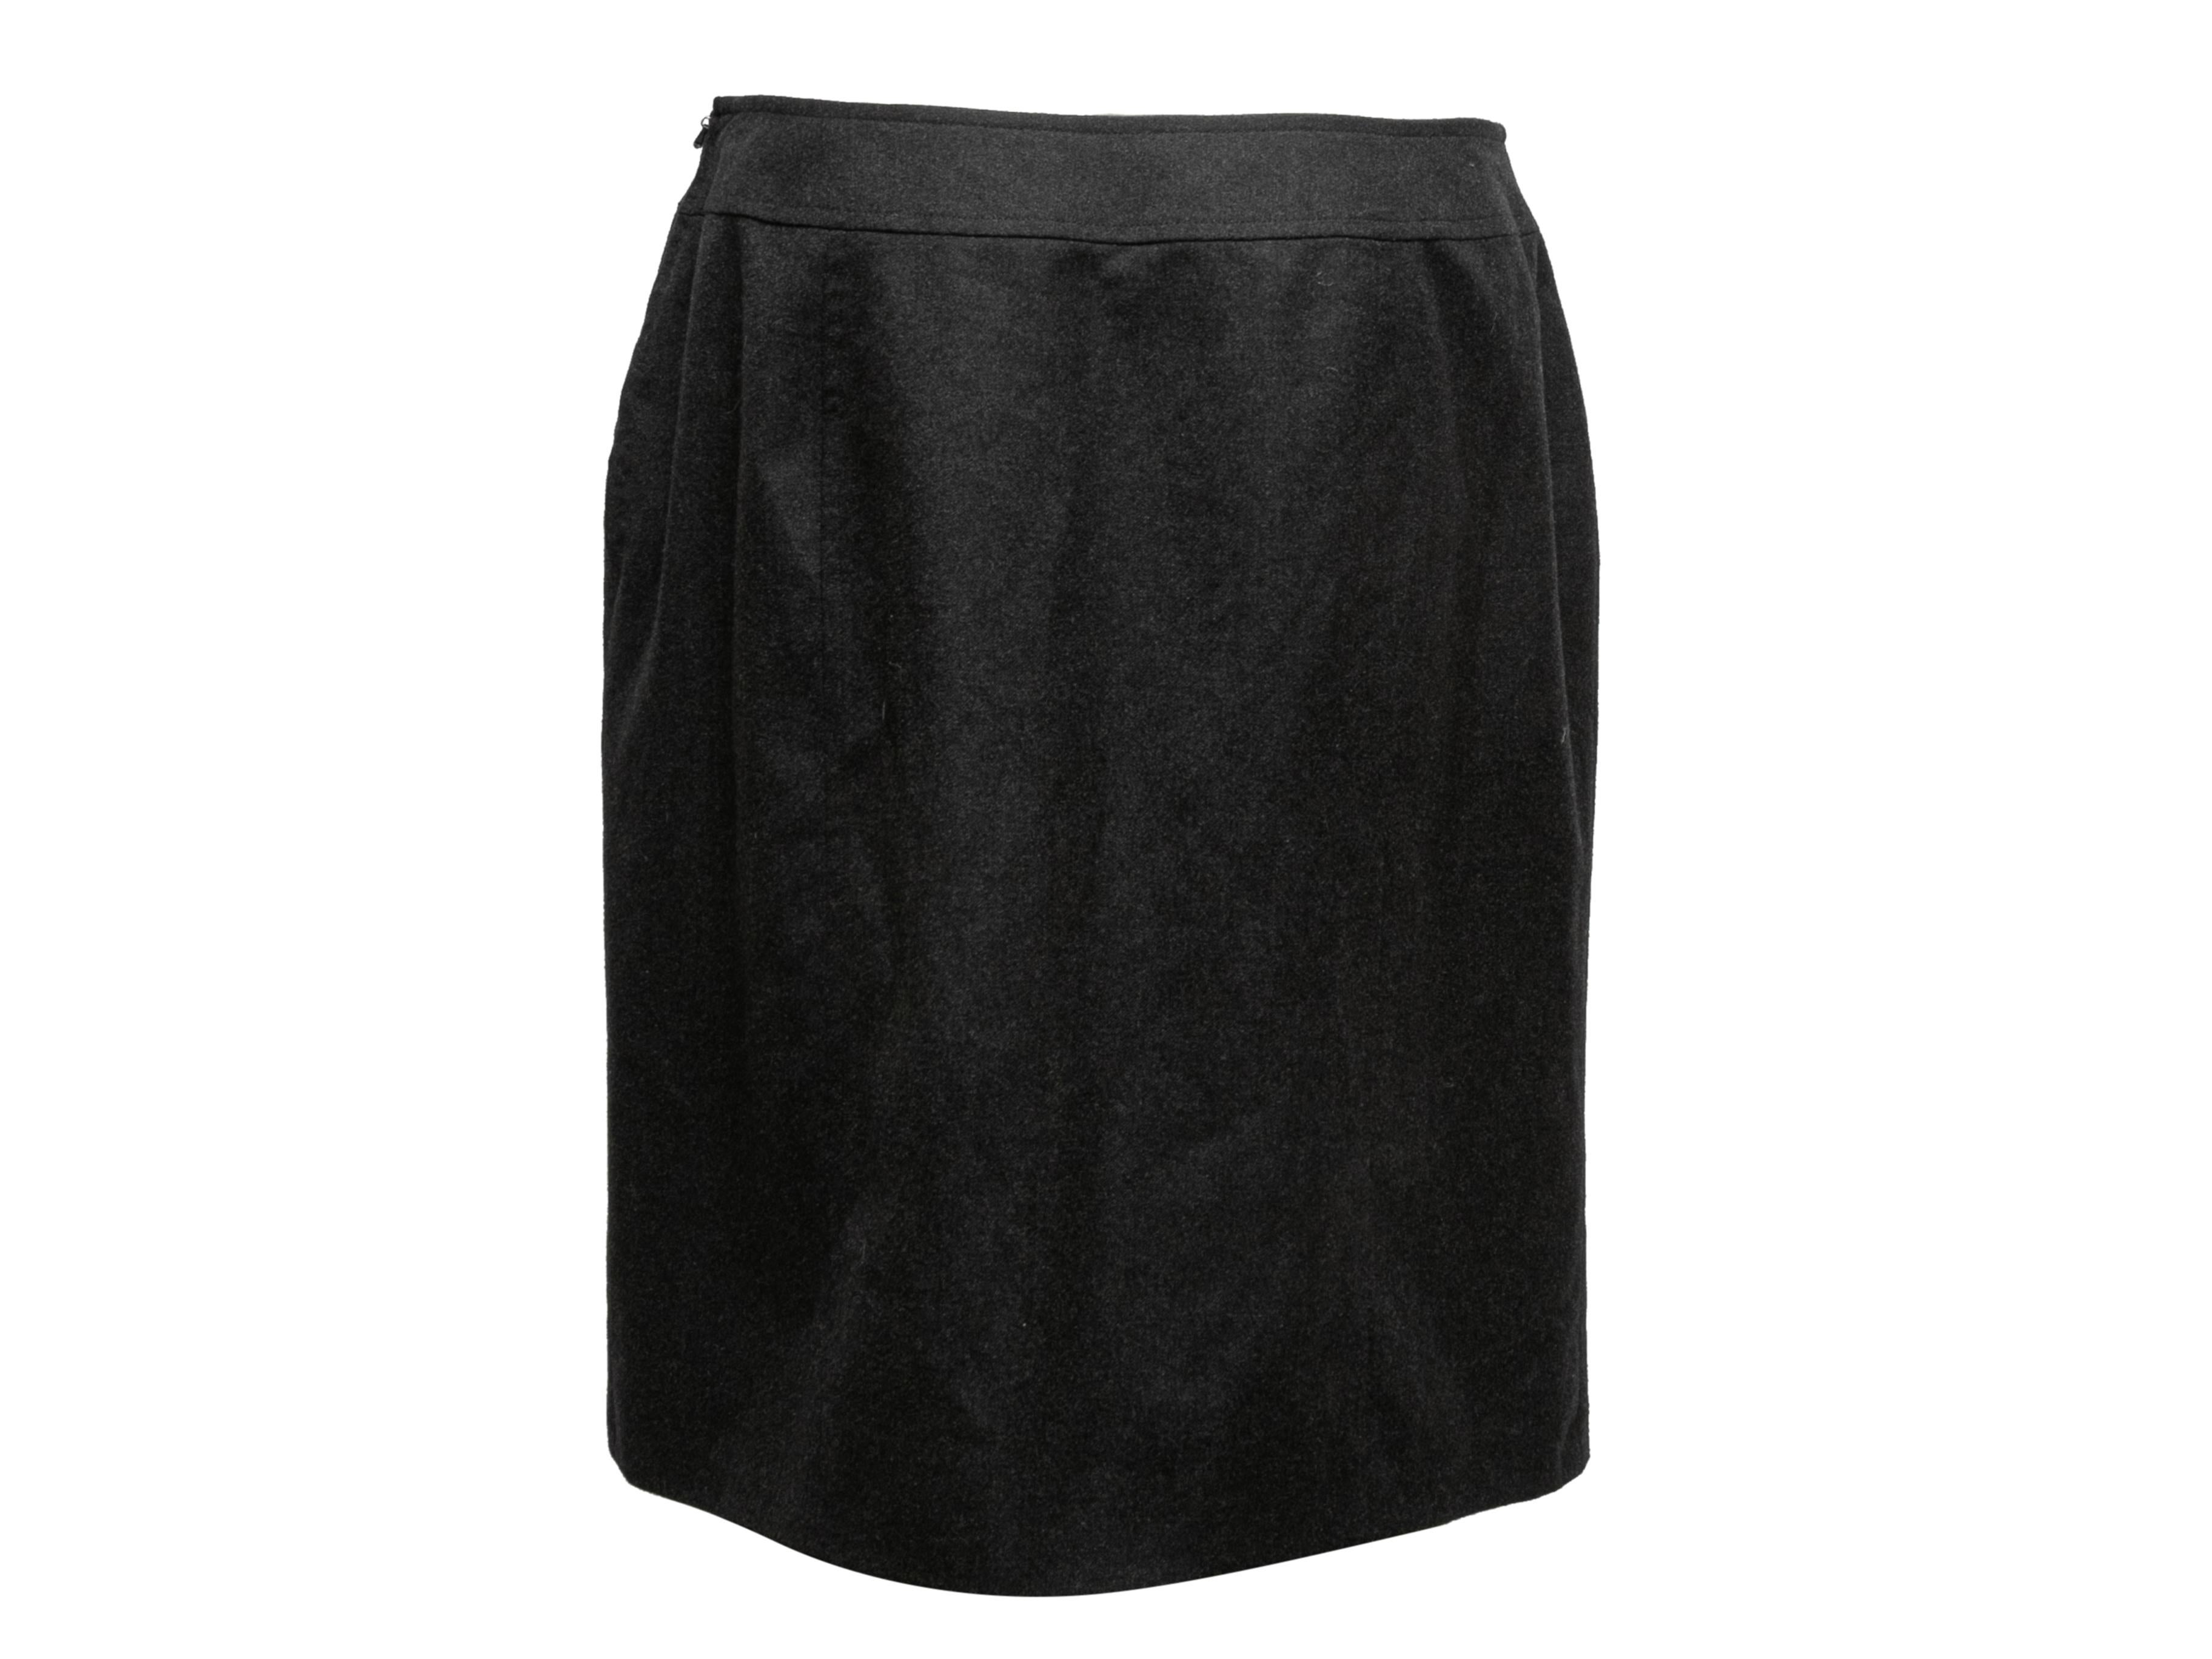 Vintage charcoal wool and cashmere-blend skirt by Chanel. From the Fall/Winter 1997 Collection. Buckle accent at front waist. Zip closure at side. 33